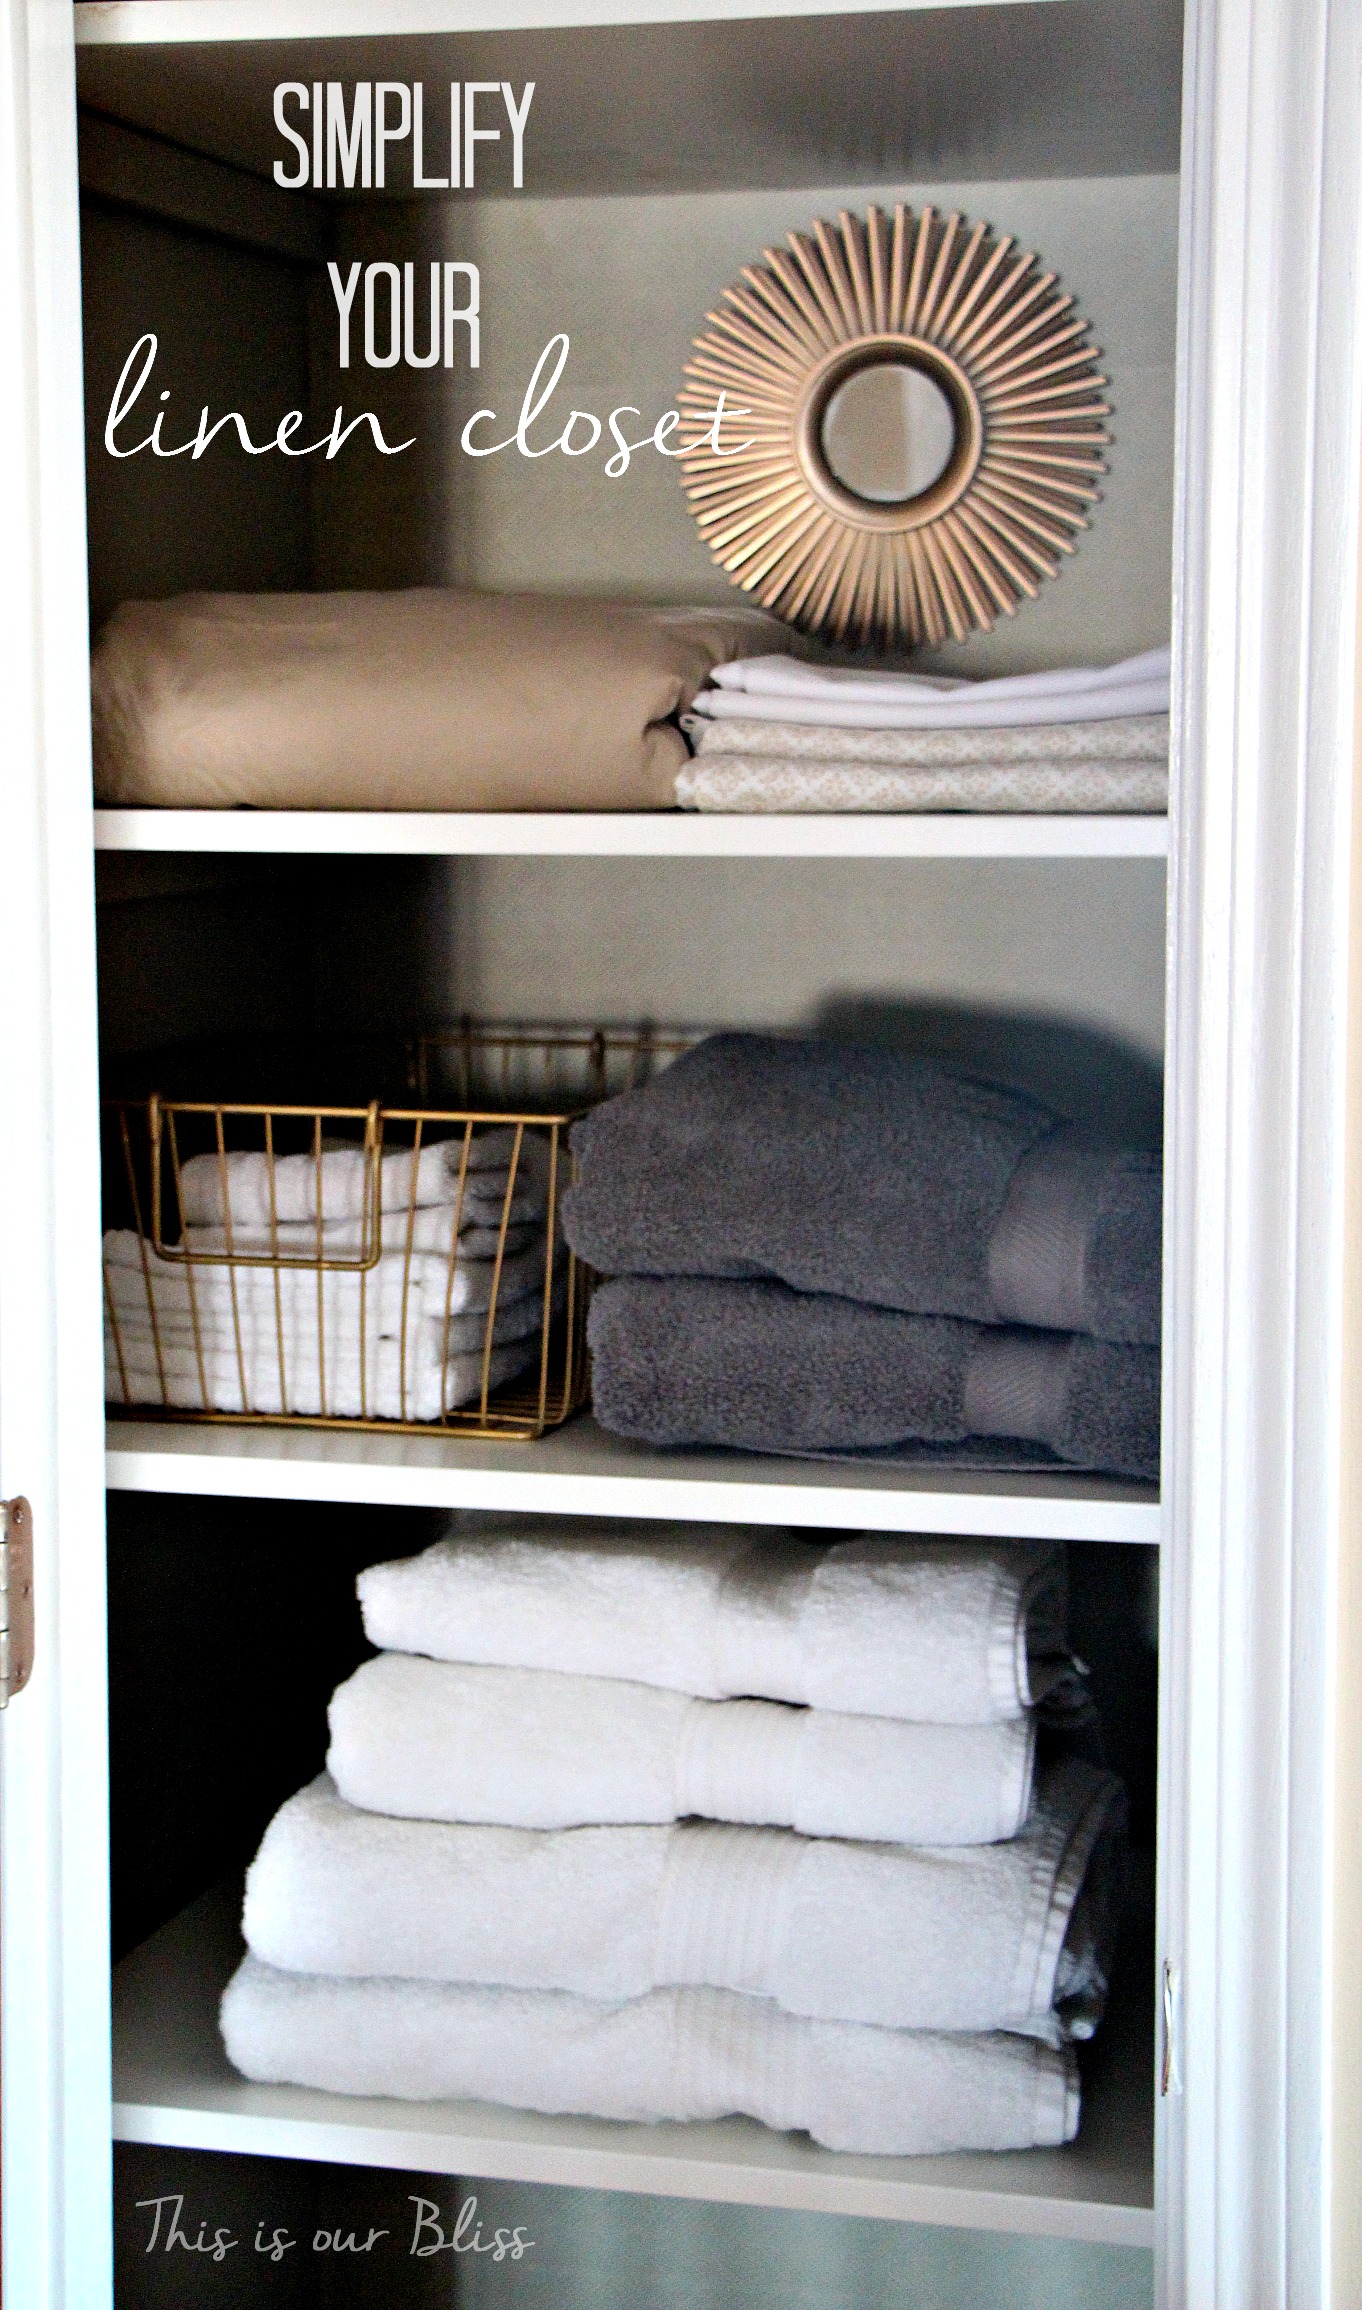 Simplify your linen closet - declutter and organize - linen closet makeover - This is our Bliss